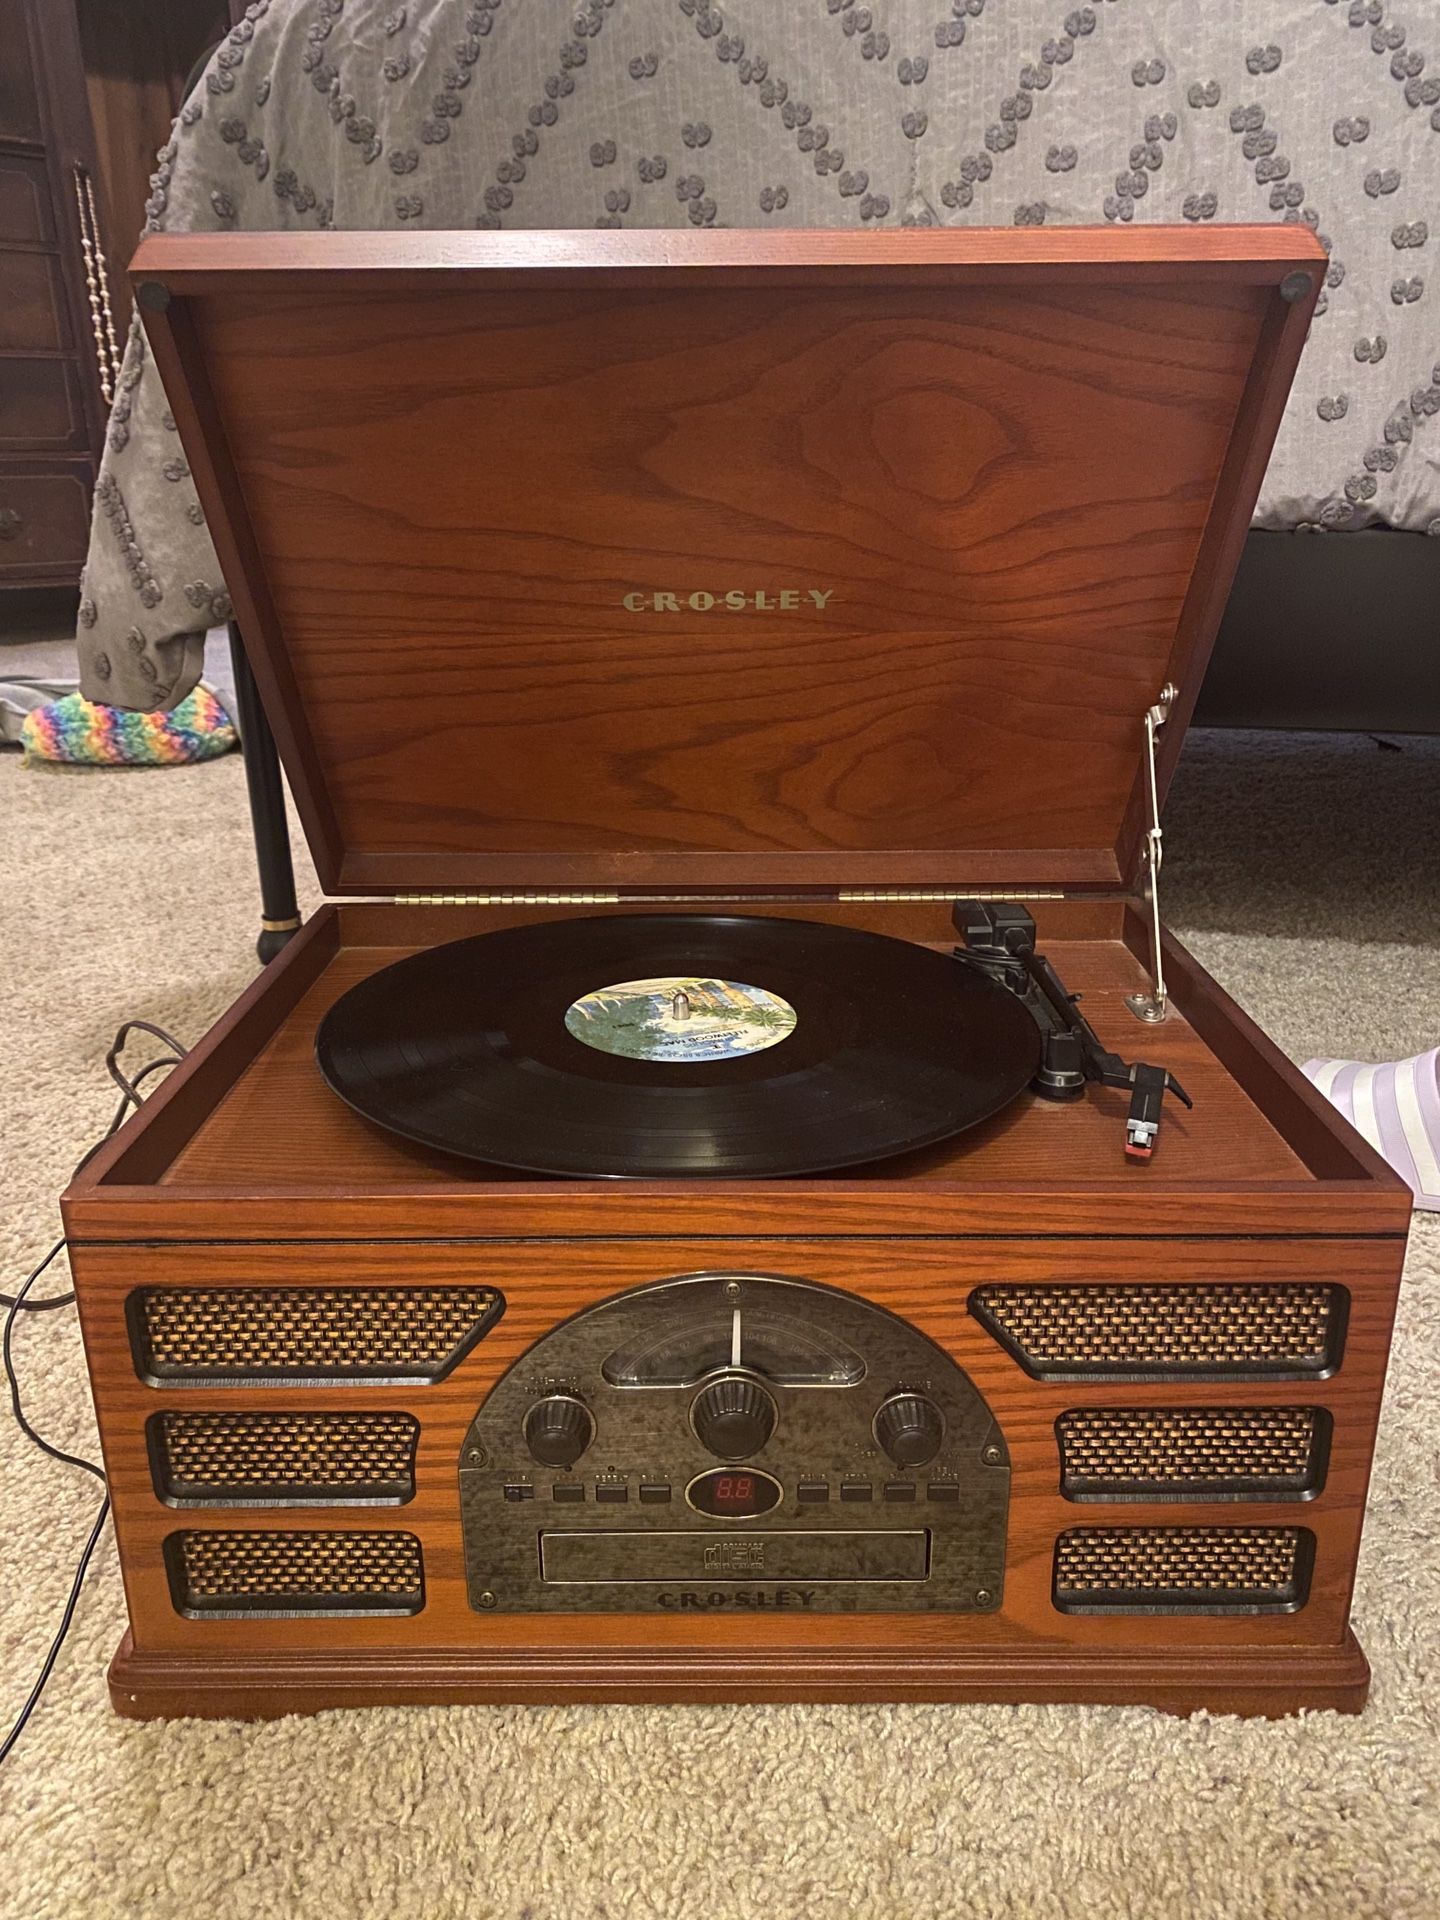 Slightly used Record player!!